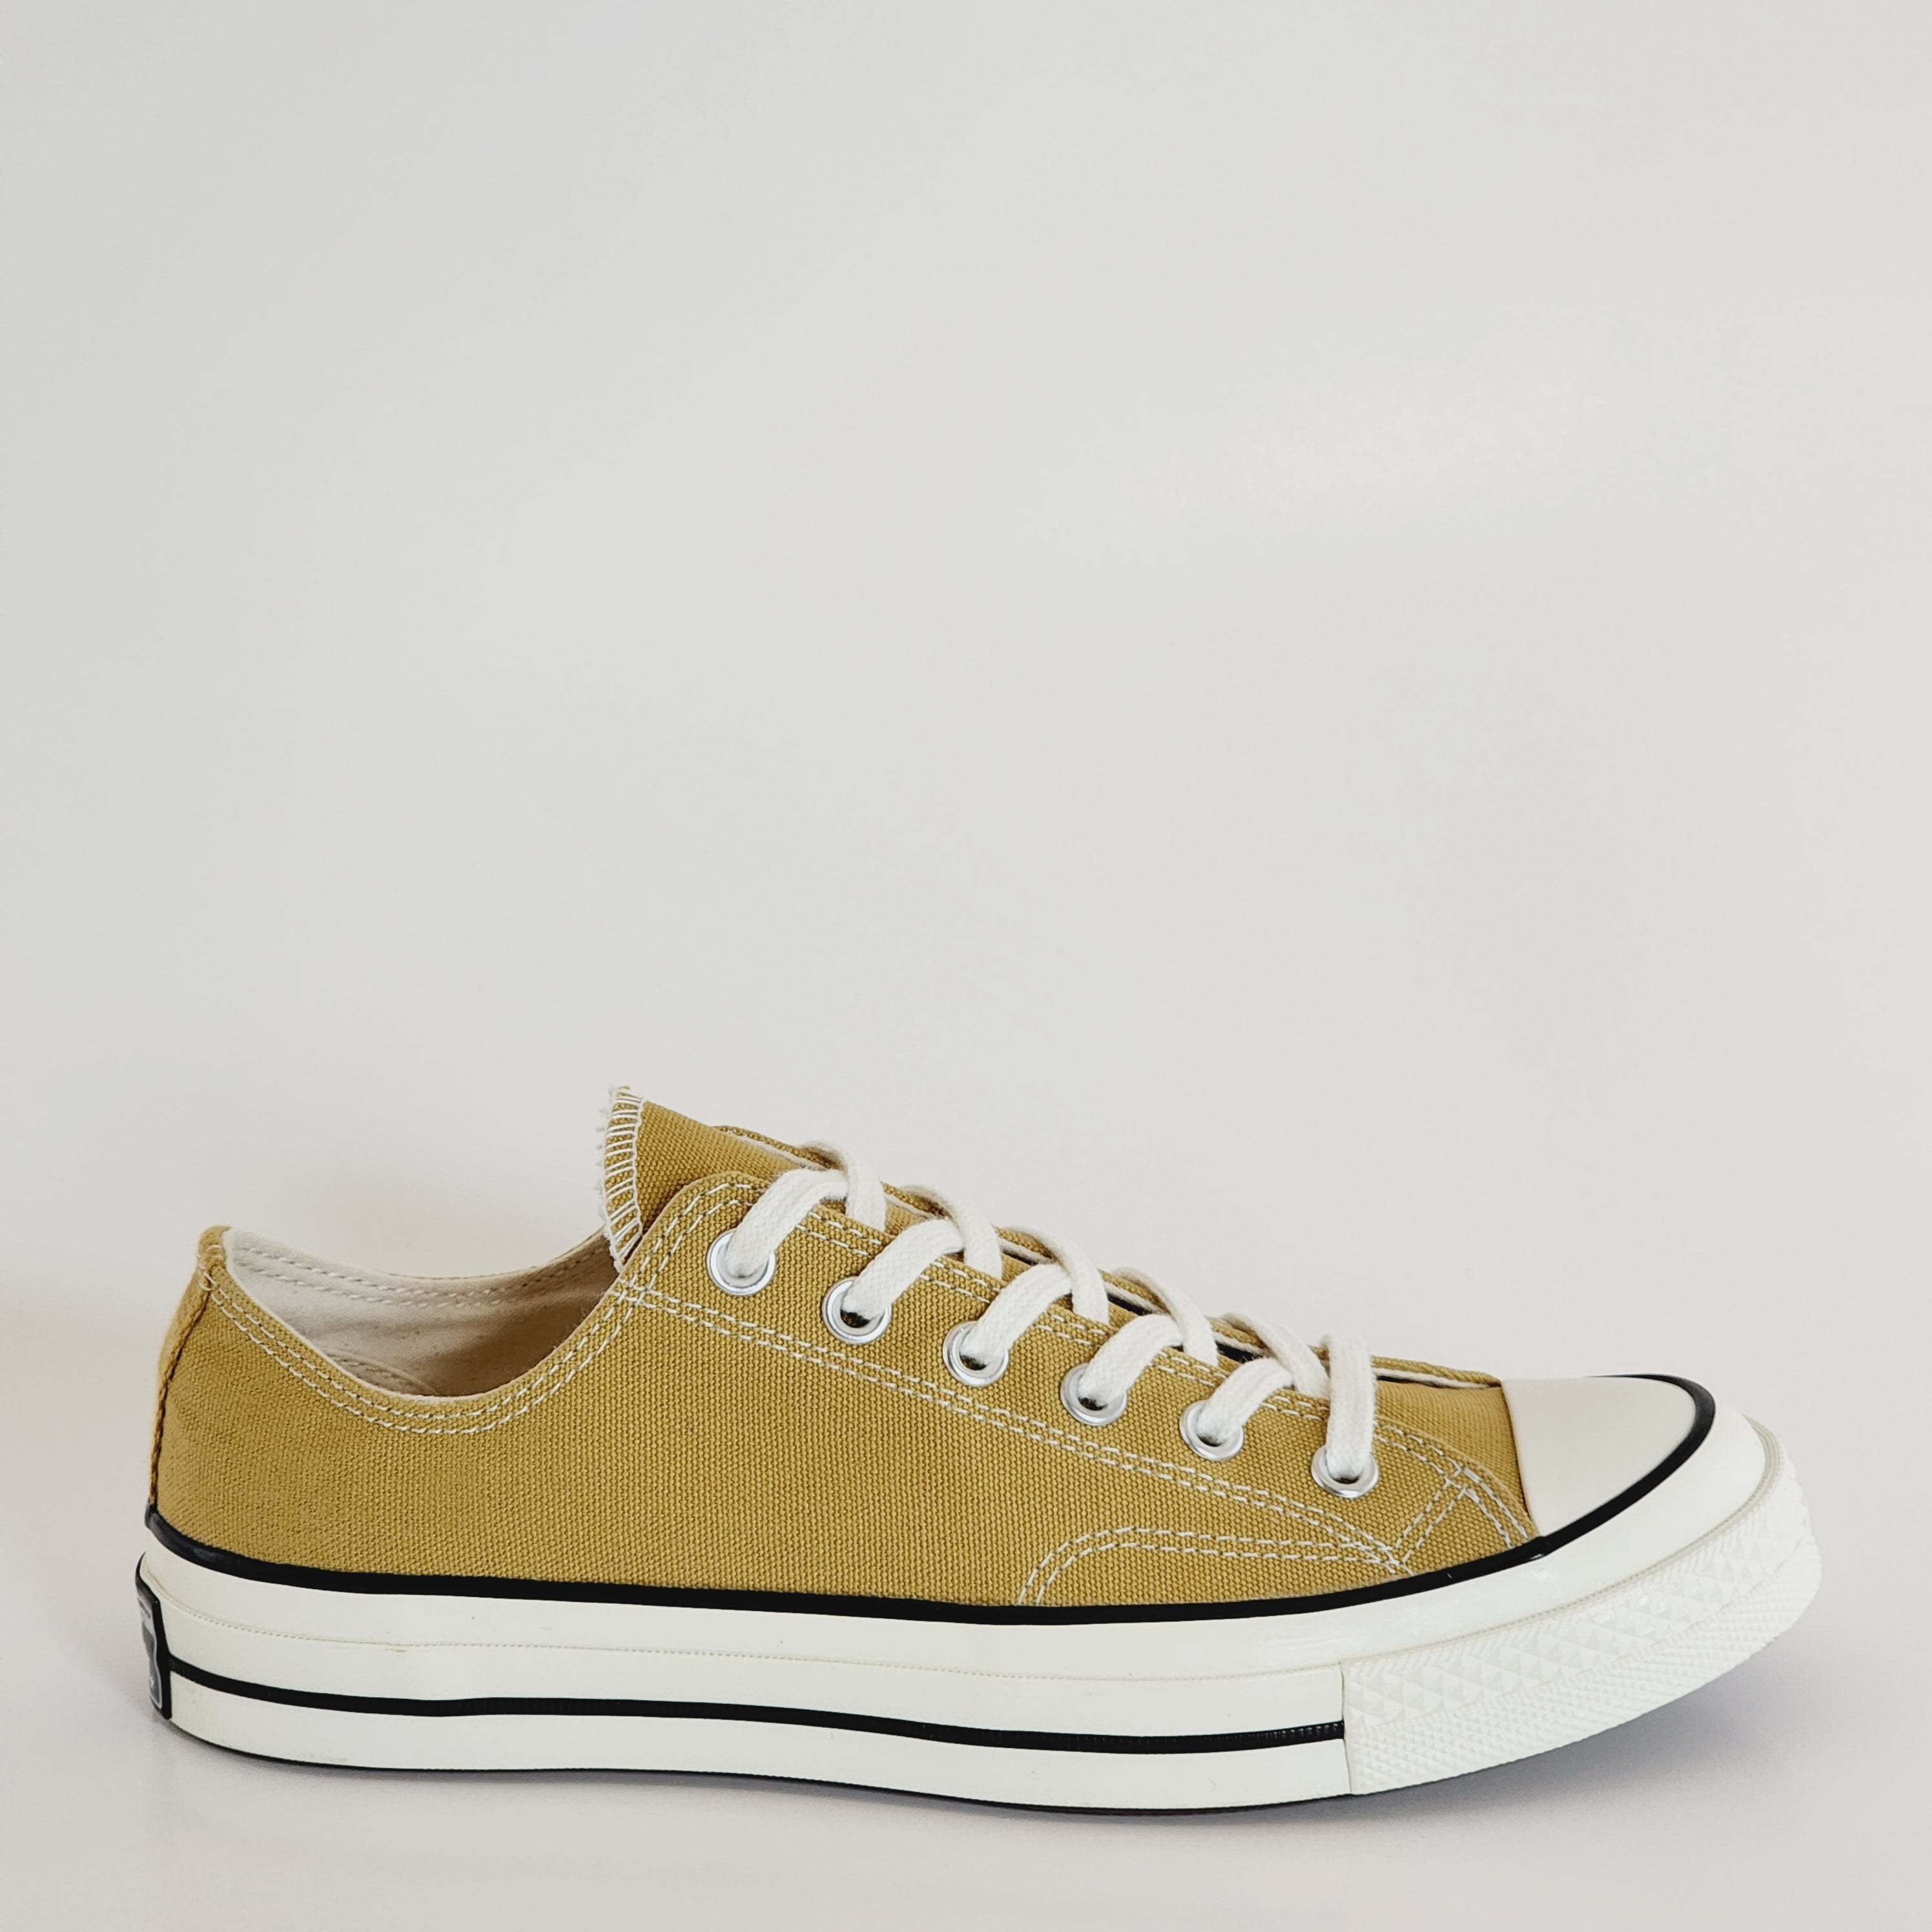 Converse Chuck 70 Low Ox Seasonal Color 'Dunescape' Sneakers A04593C NWT